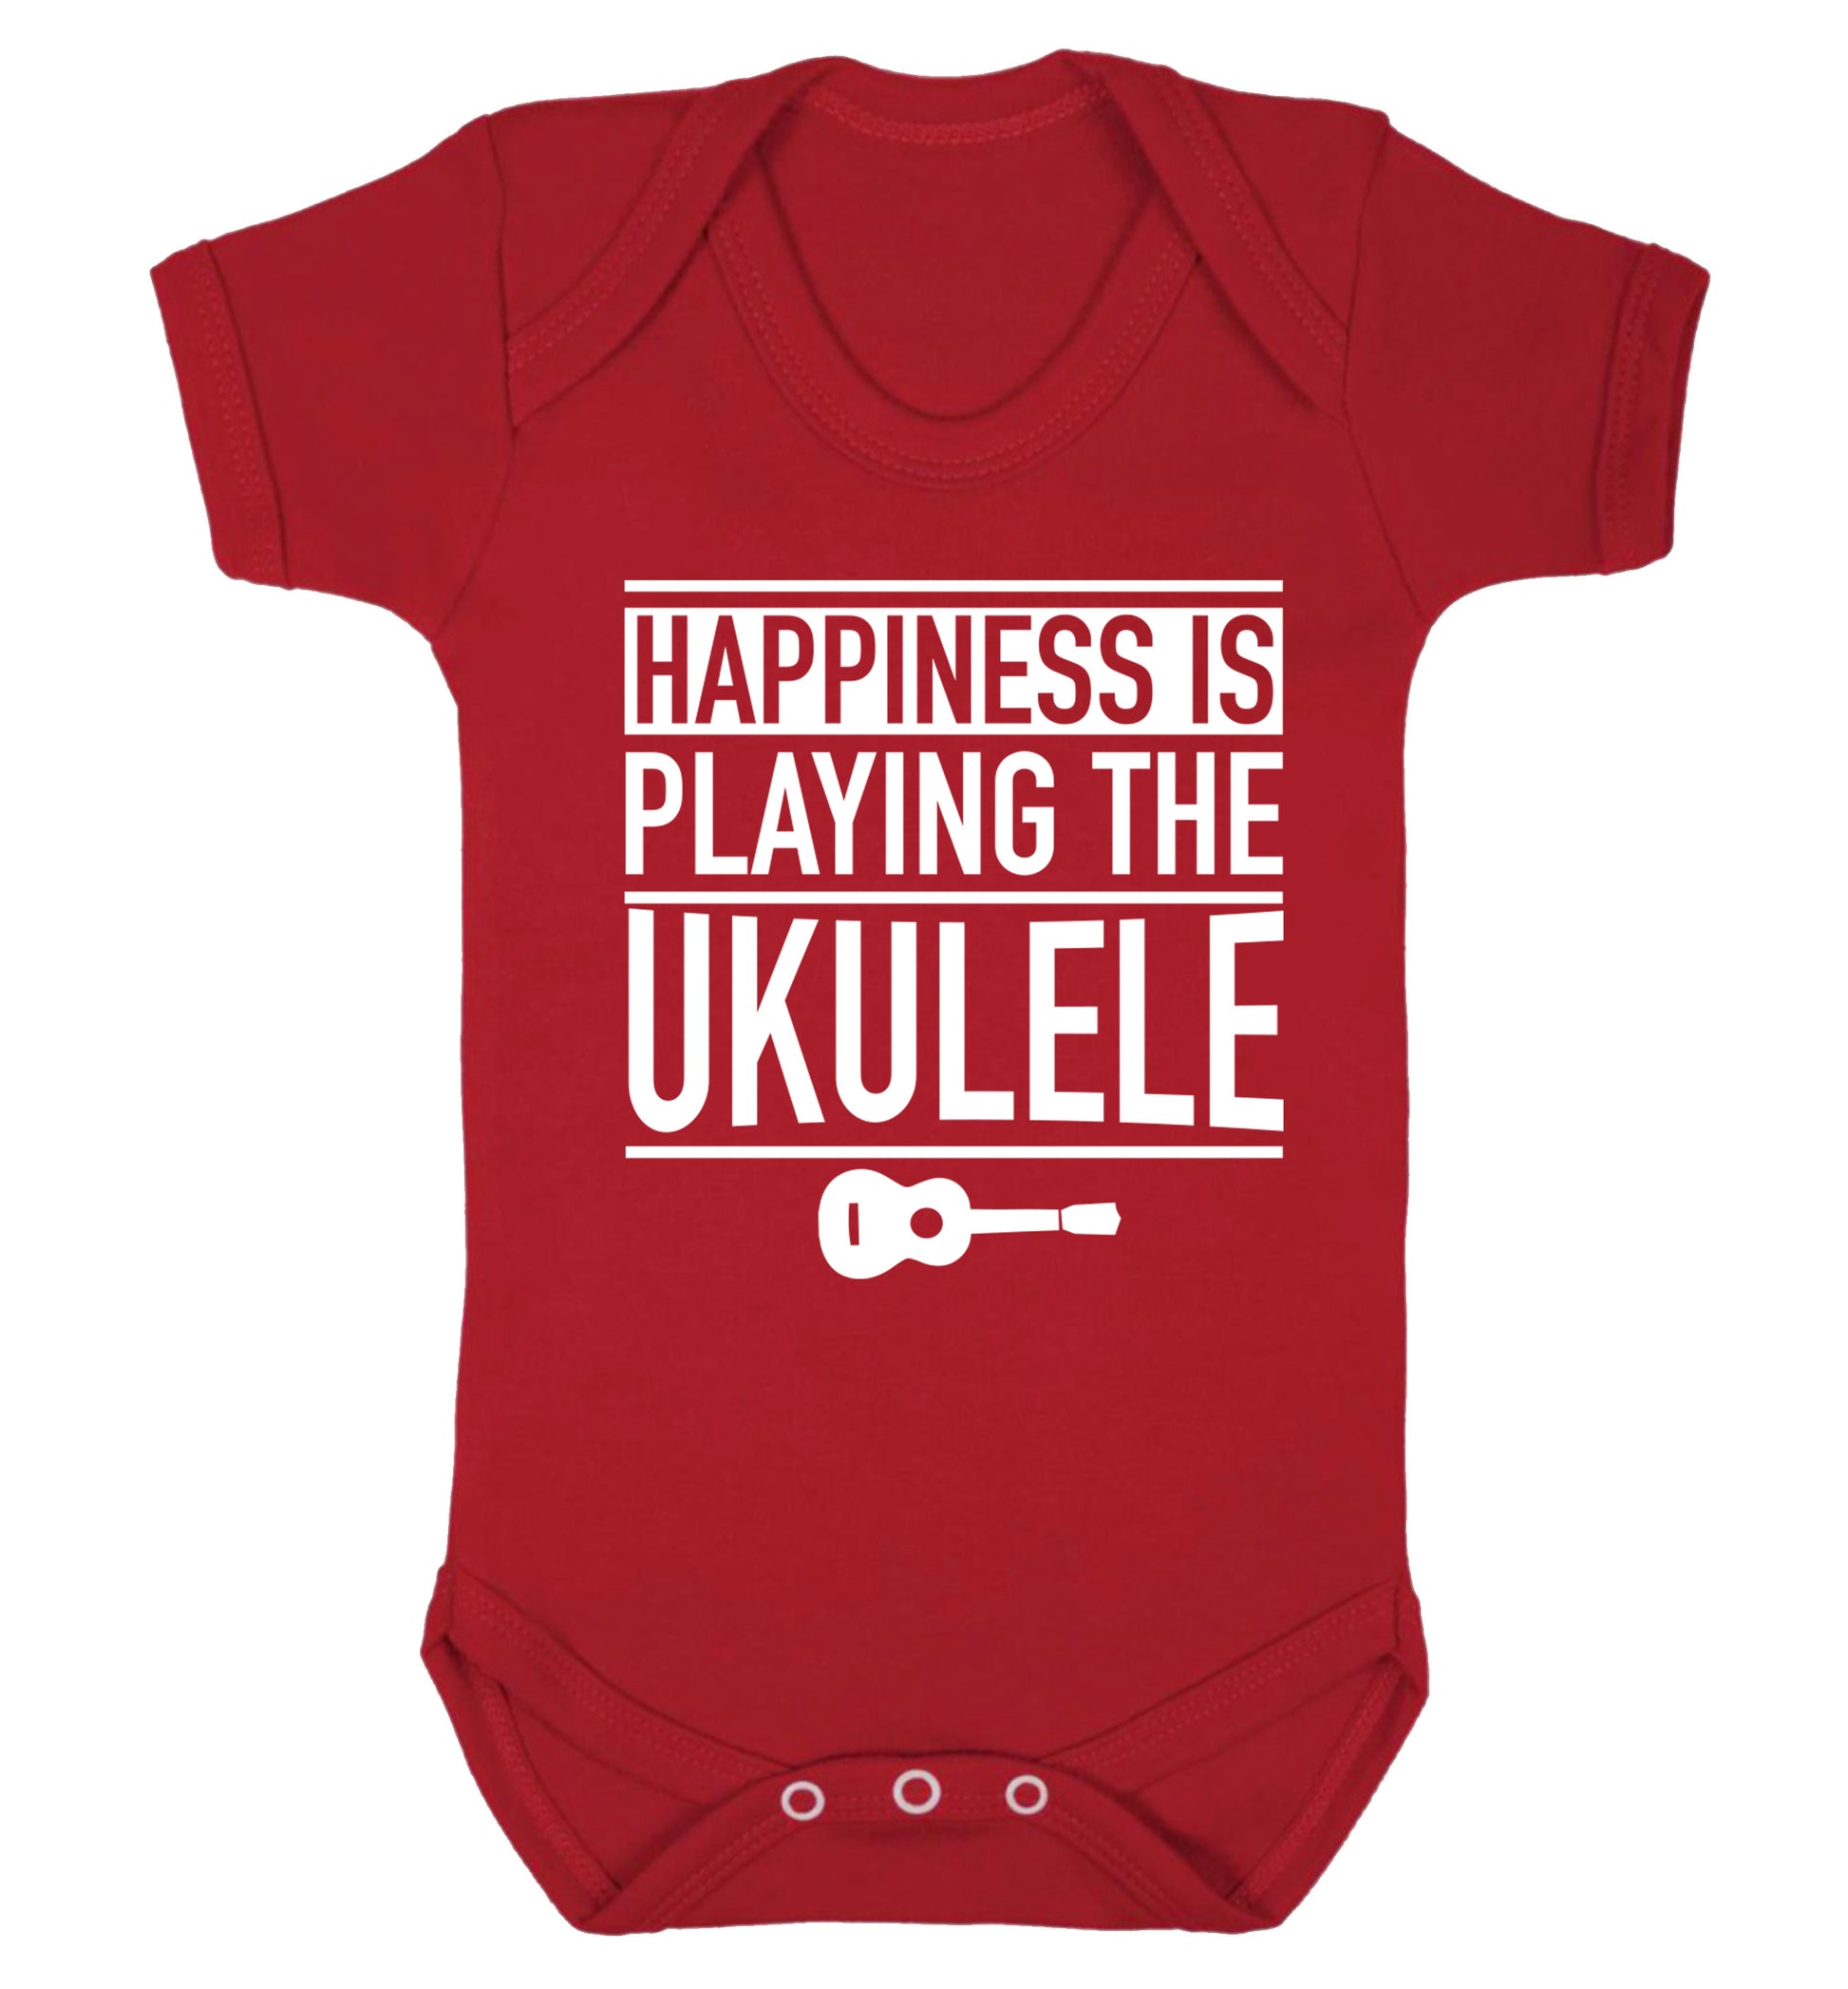 Happines is playing the ukulele Baby Vest red 18-24 months